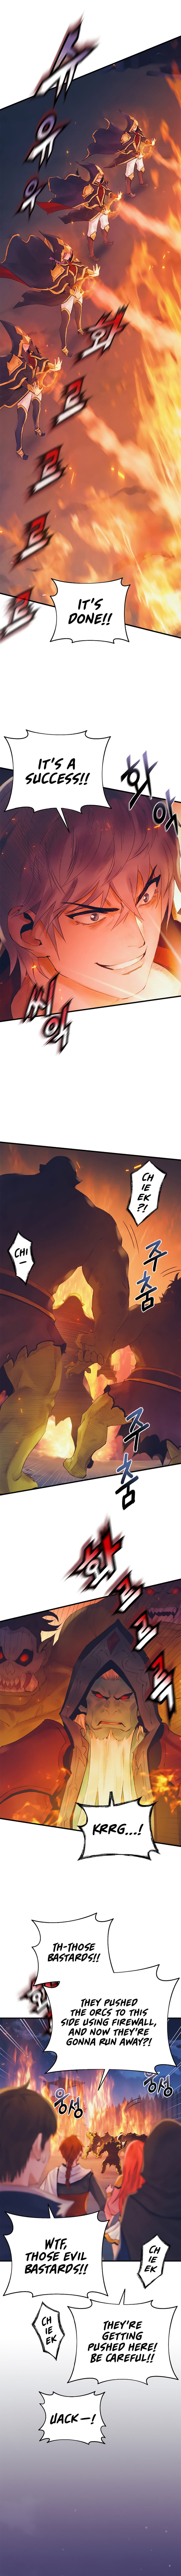 The Healing Priest of the Sun - Chapter 32 Page 4